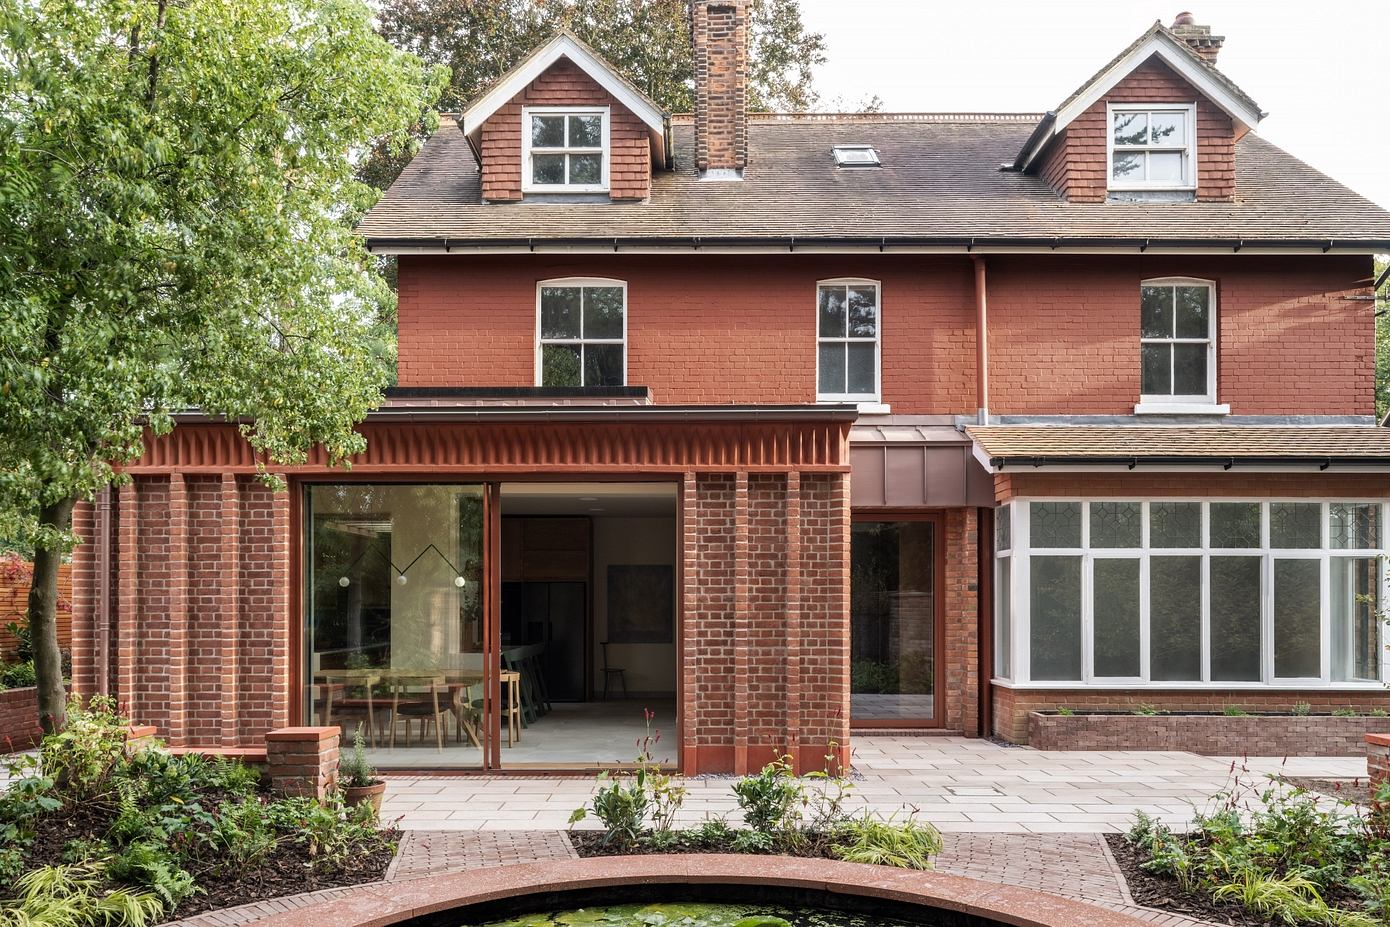 Cast Corbel House: Blending Victorian Charm and Contemporary Flair